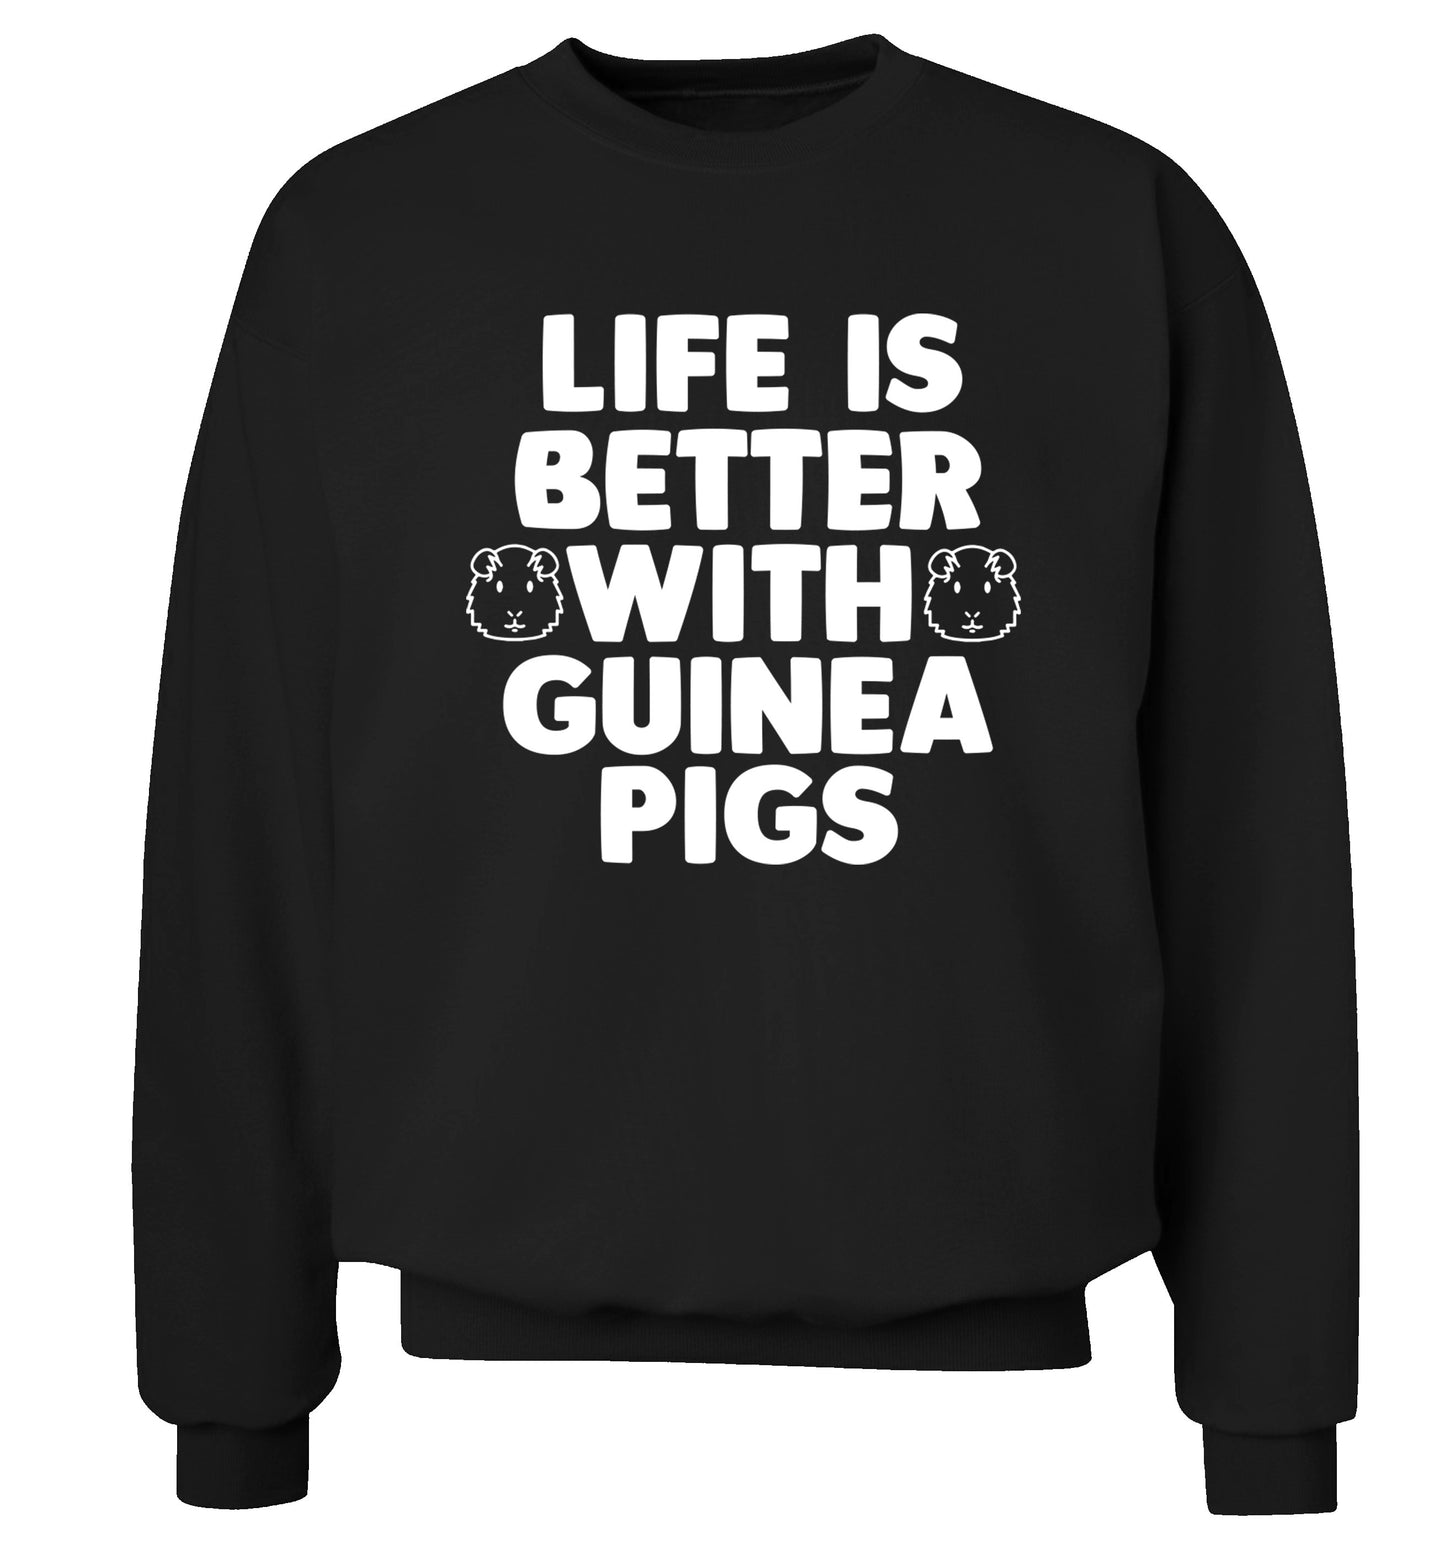 Life is better with guinea pigs Adult's unisex black  sweater 2XL